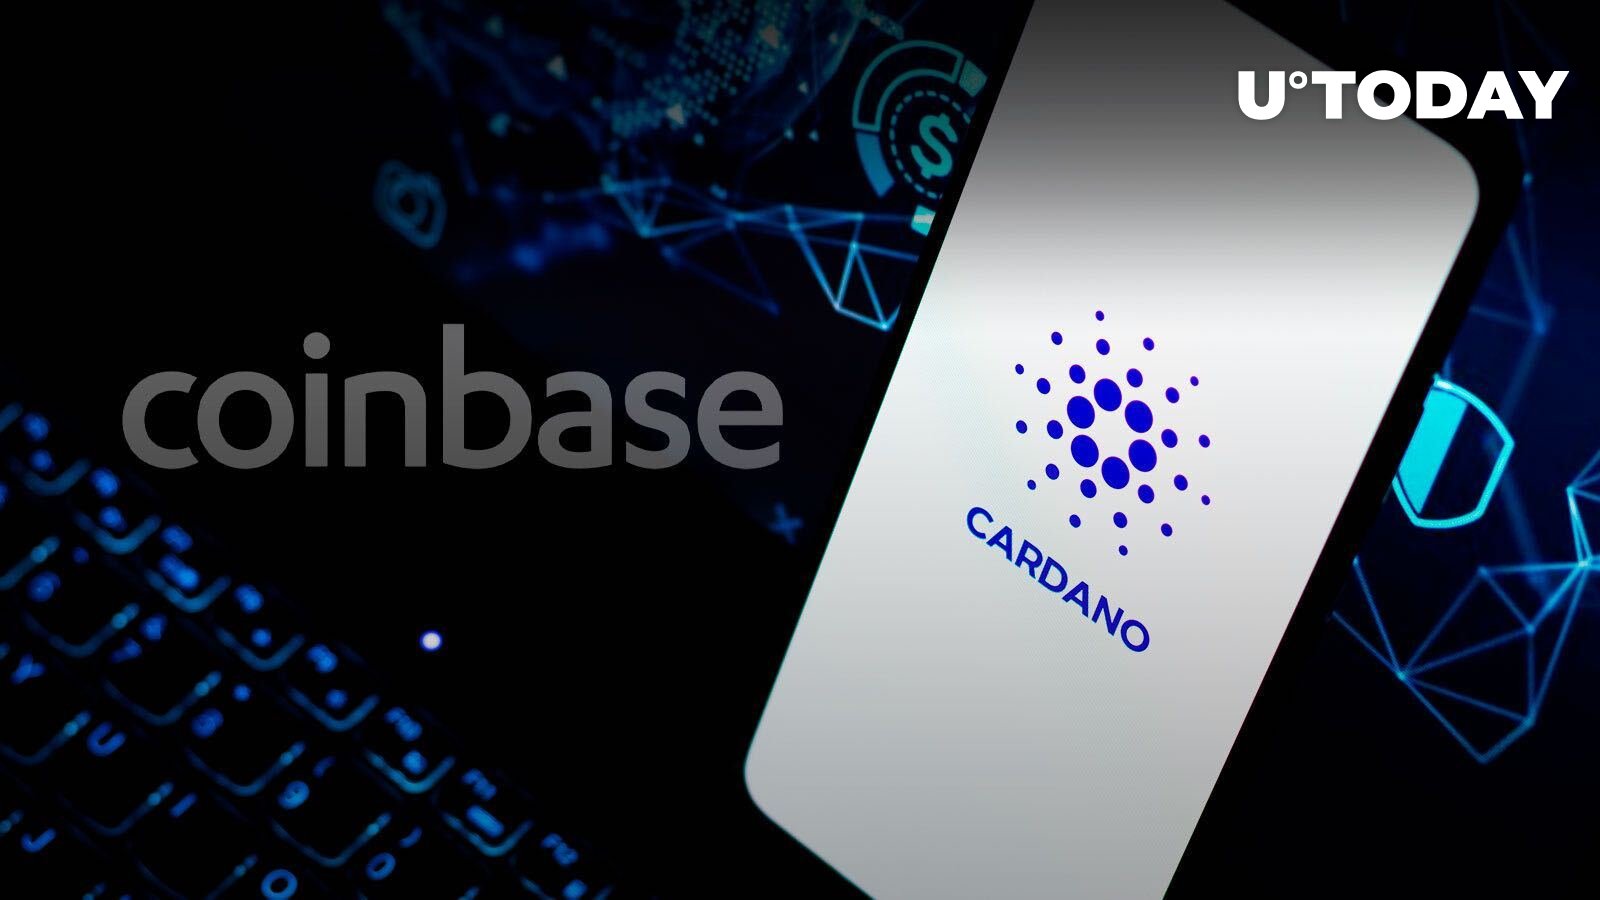 Here’s Why Cardano Community Is Dissatisfied with Coinbase